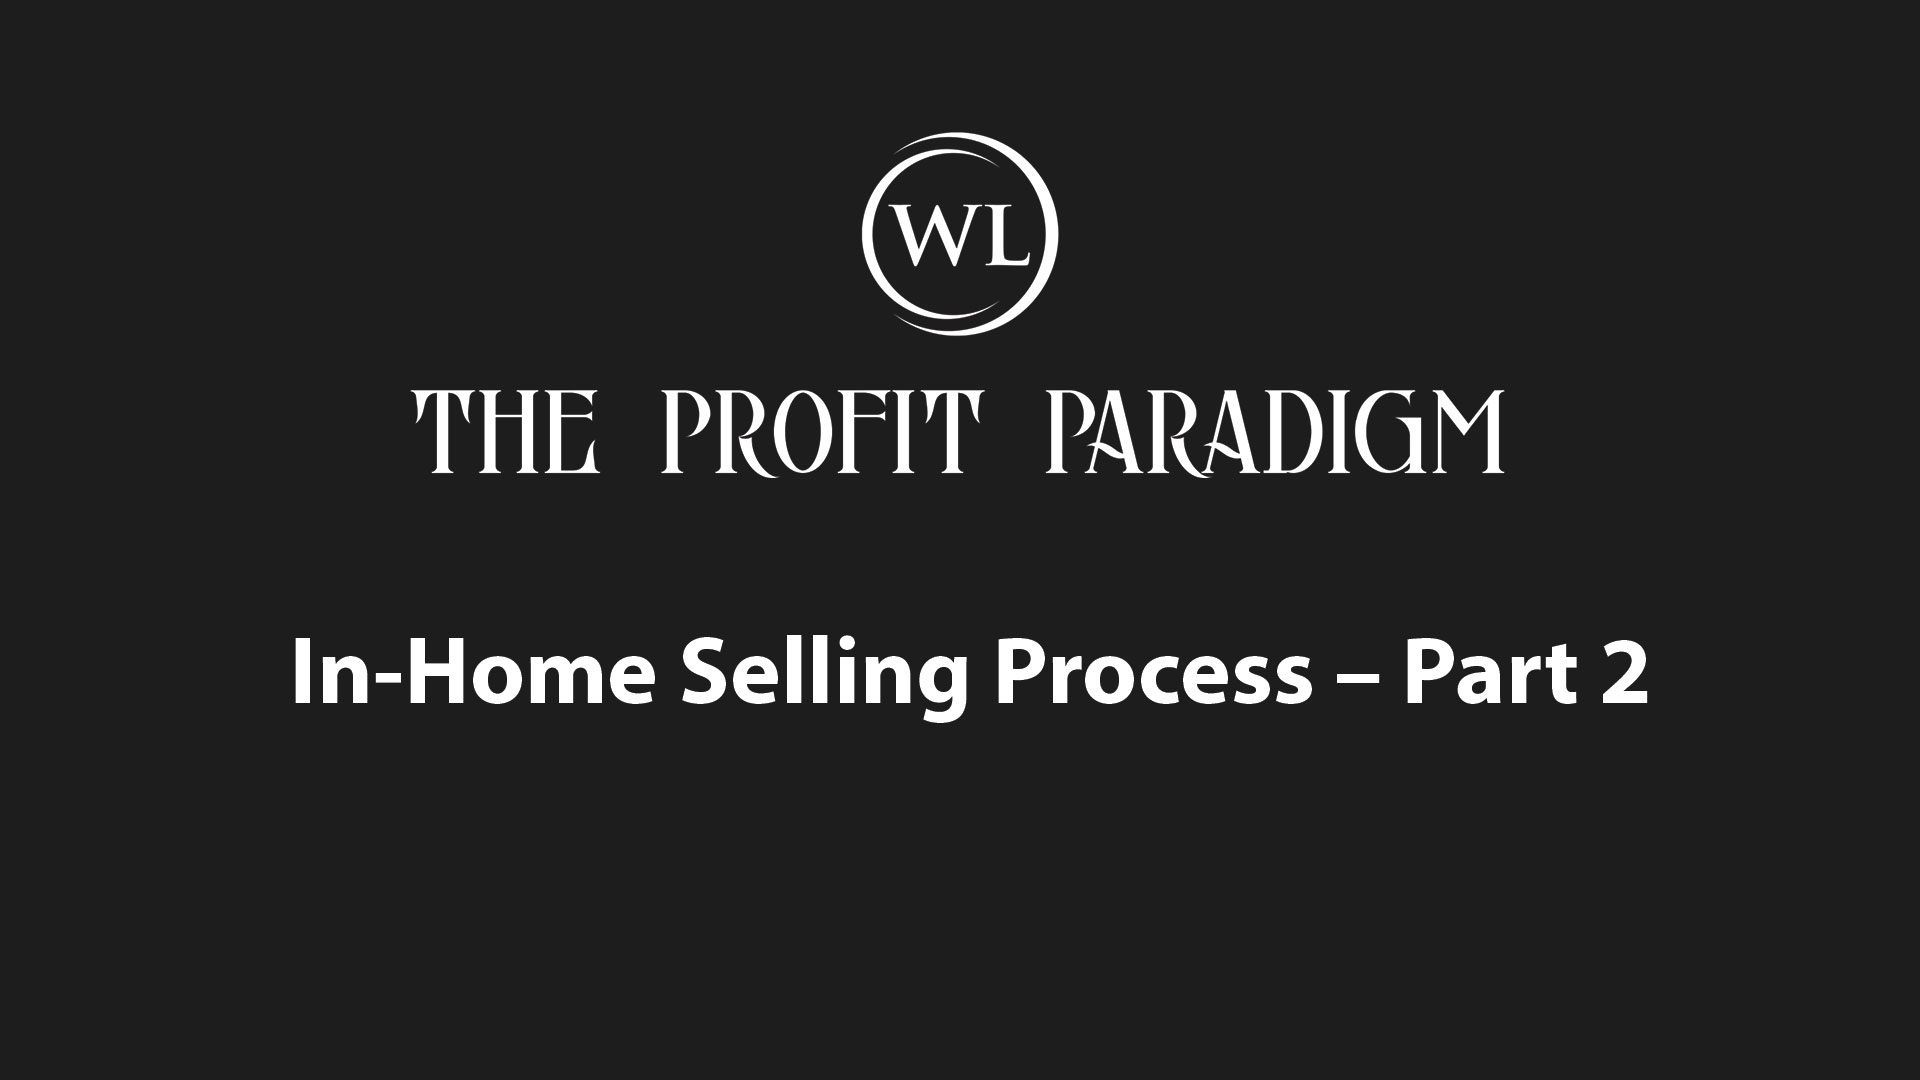 In-Home Selling Process – Part 2